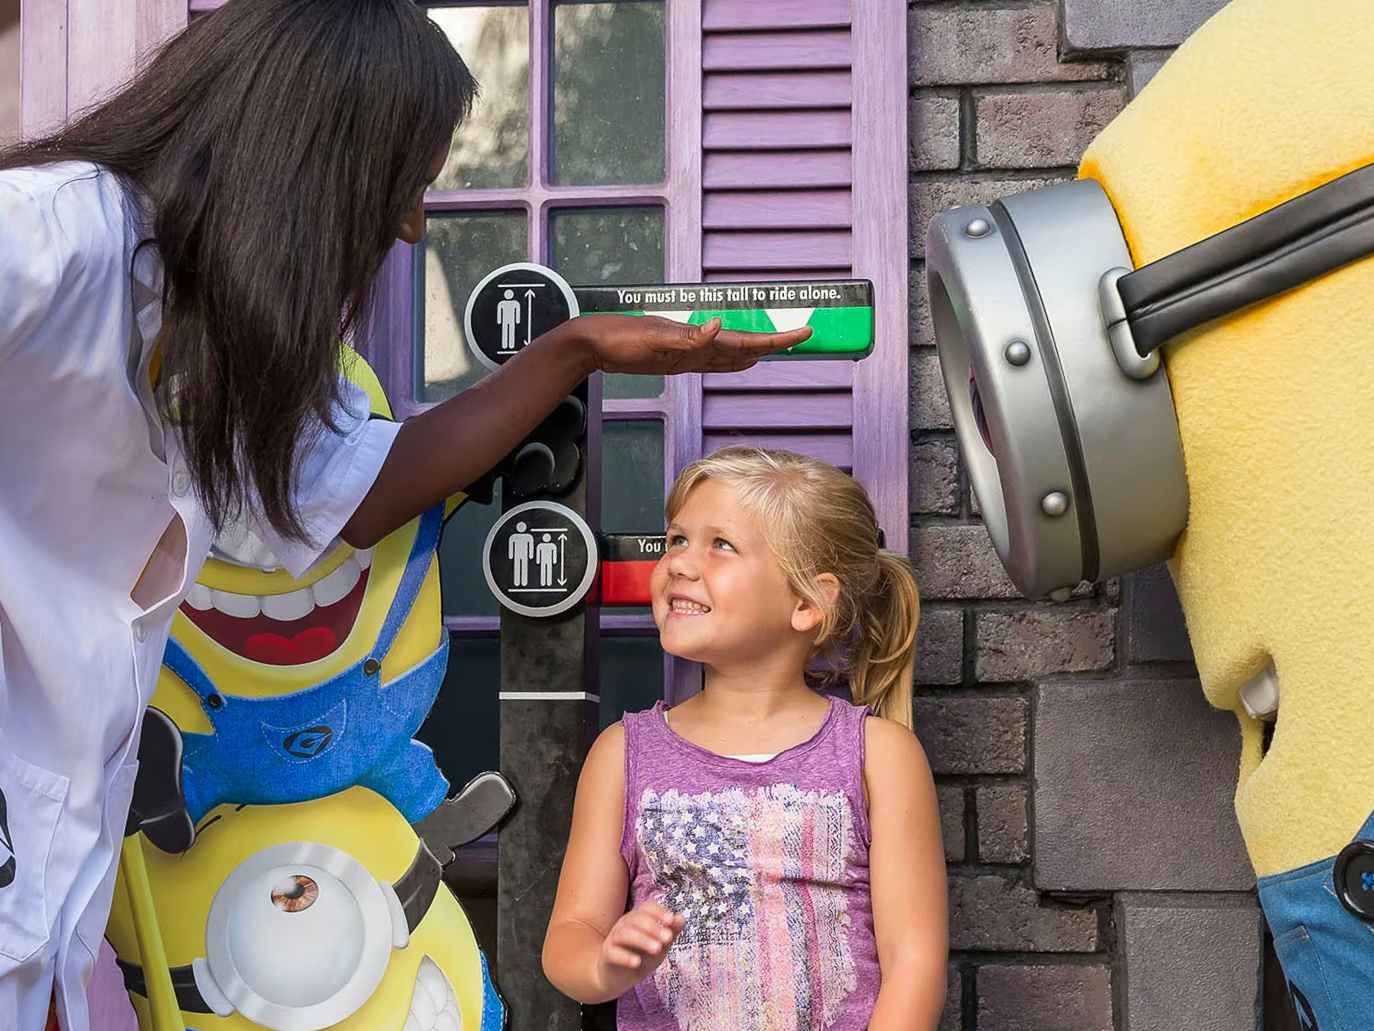 A little girl having her height measured before going on a ride